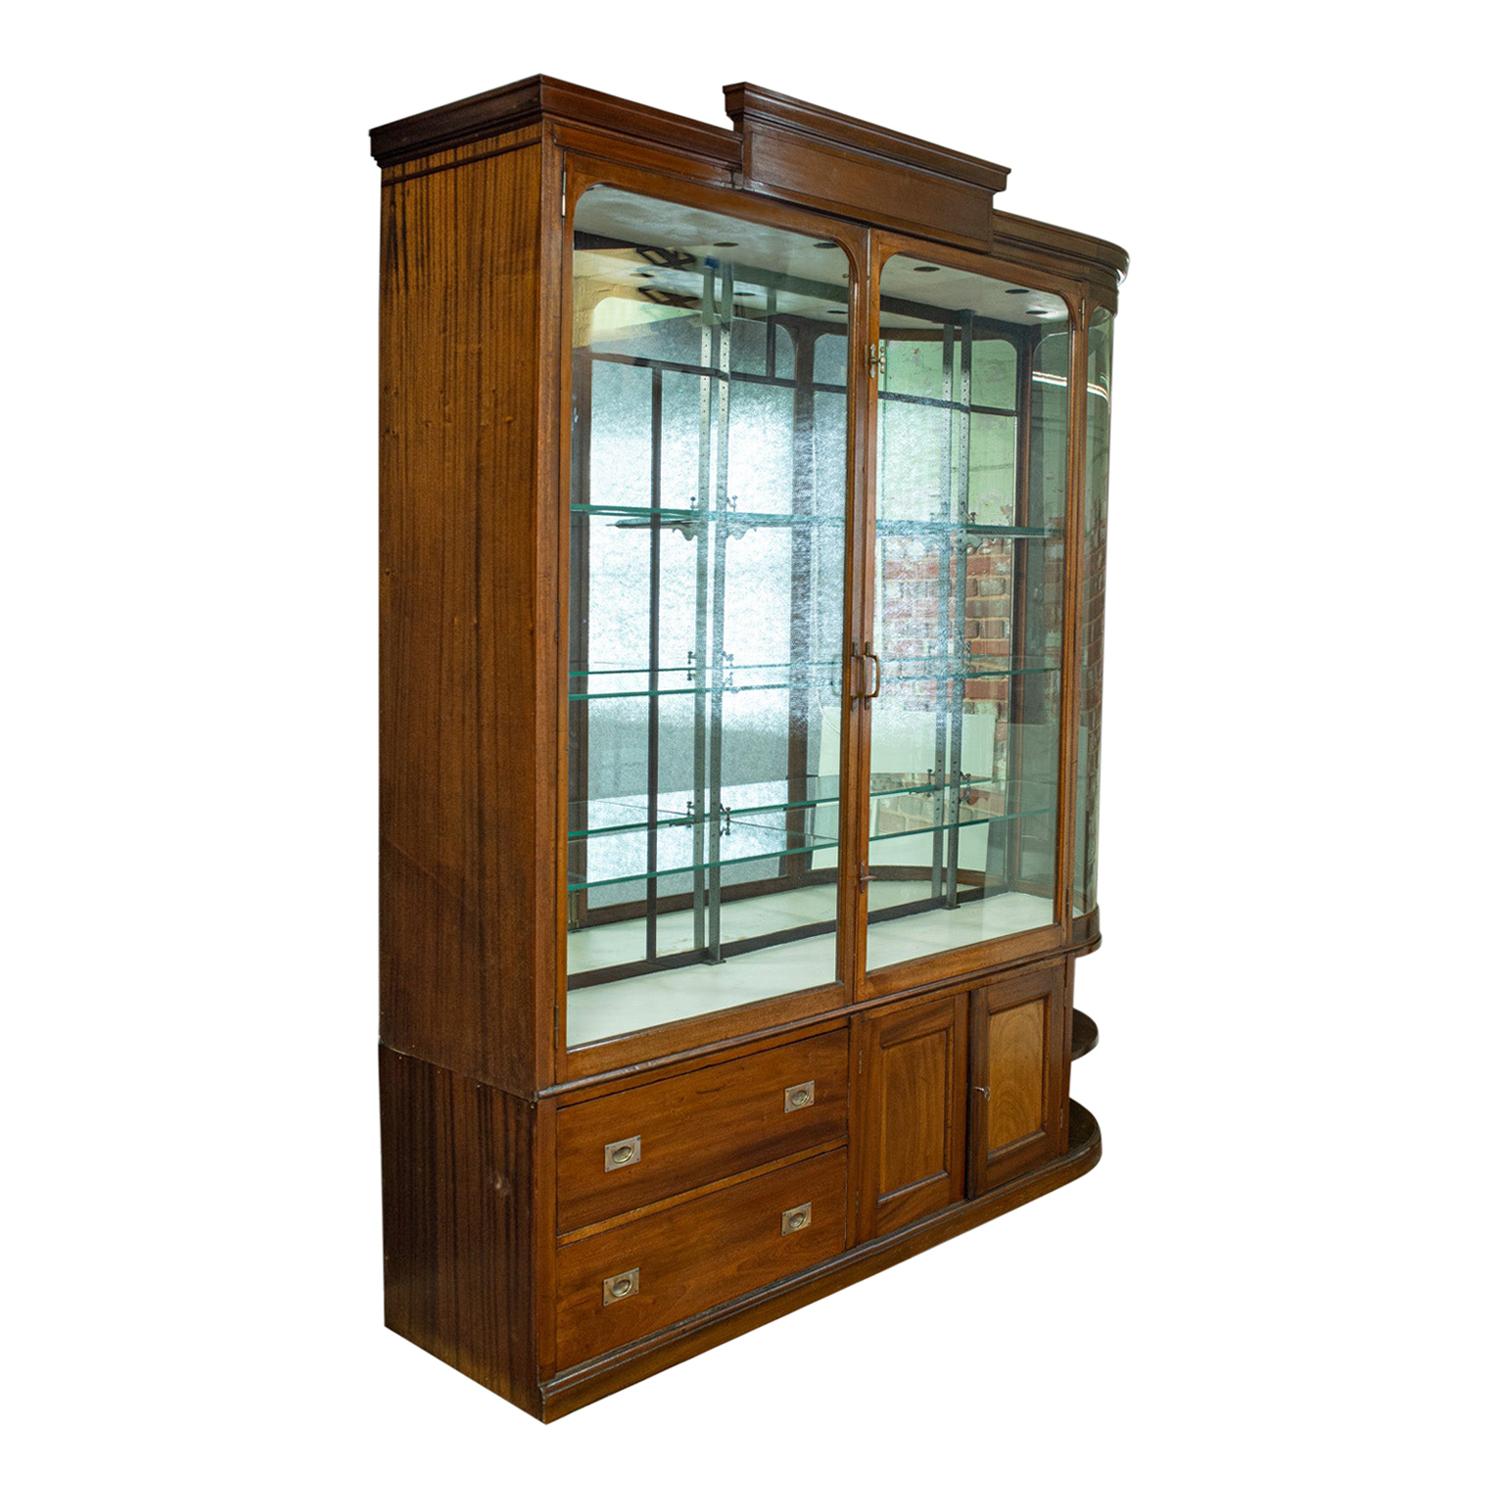 Large Antique Display Cabinet, Mahogany, Glass, Retail Showcase, Victorian